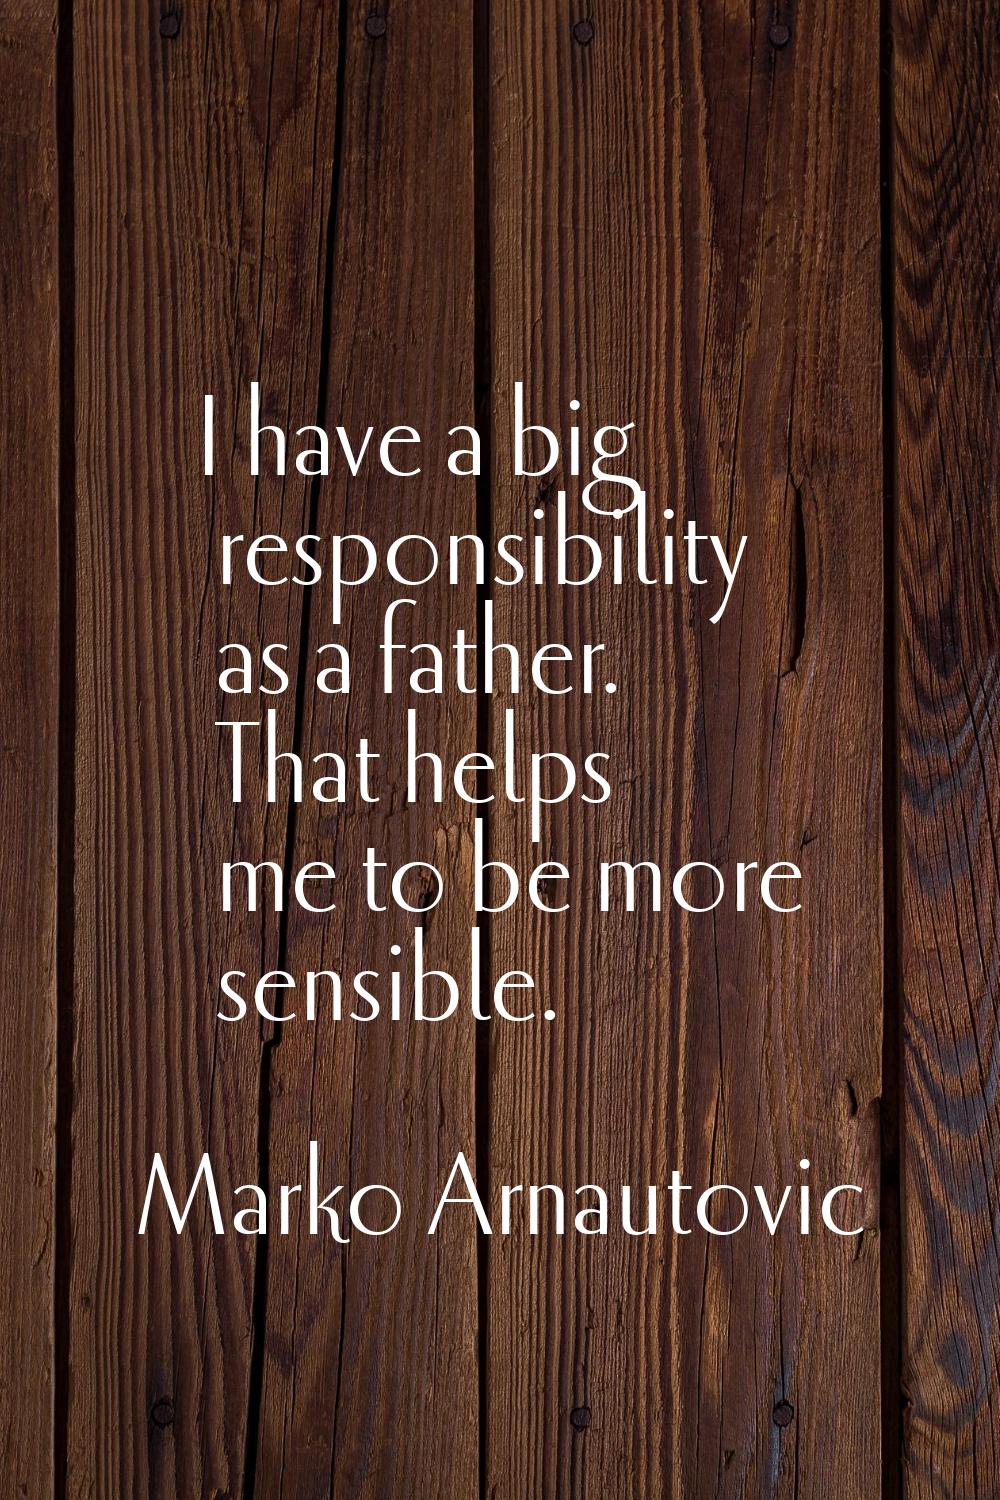 I have a big responsibility as a father. That helps me to be more sensible.